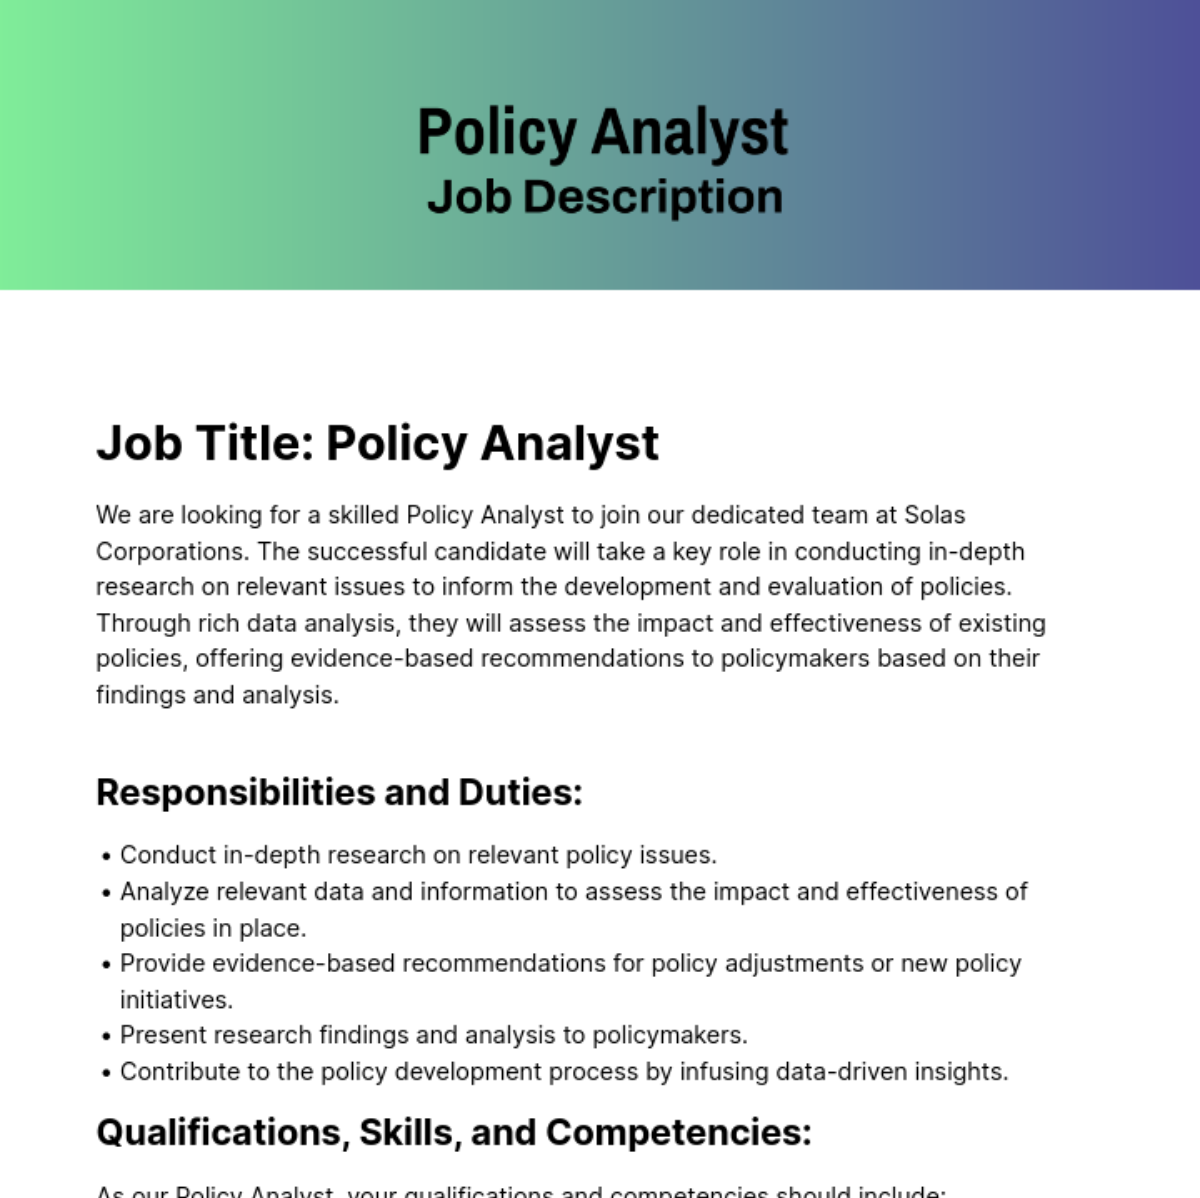 Policy Analyst Job Description Template